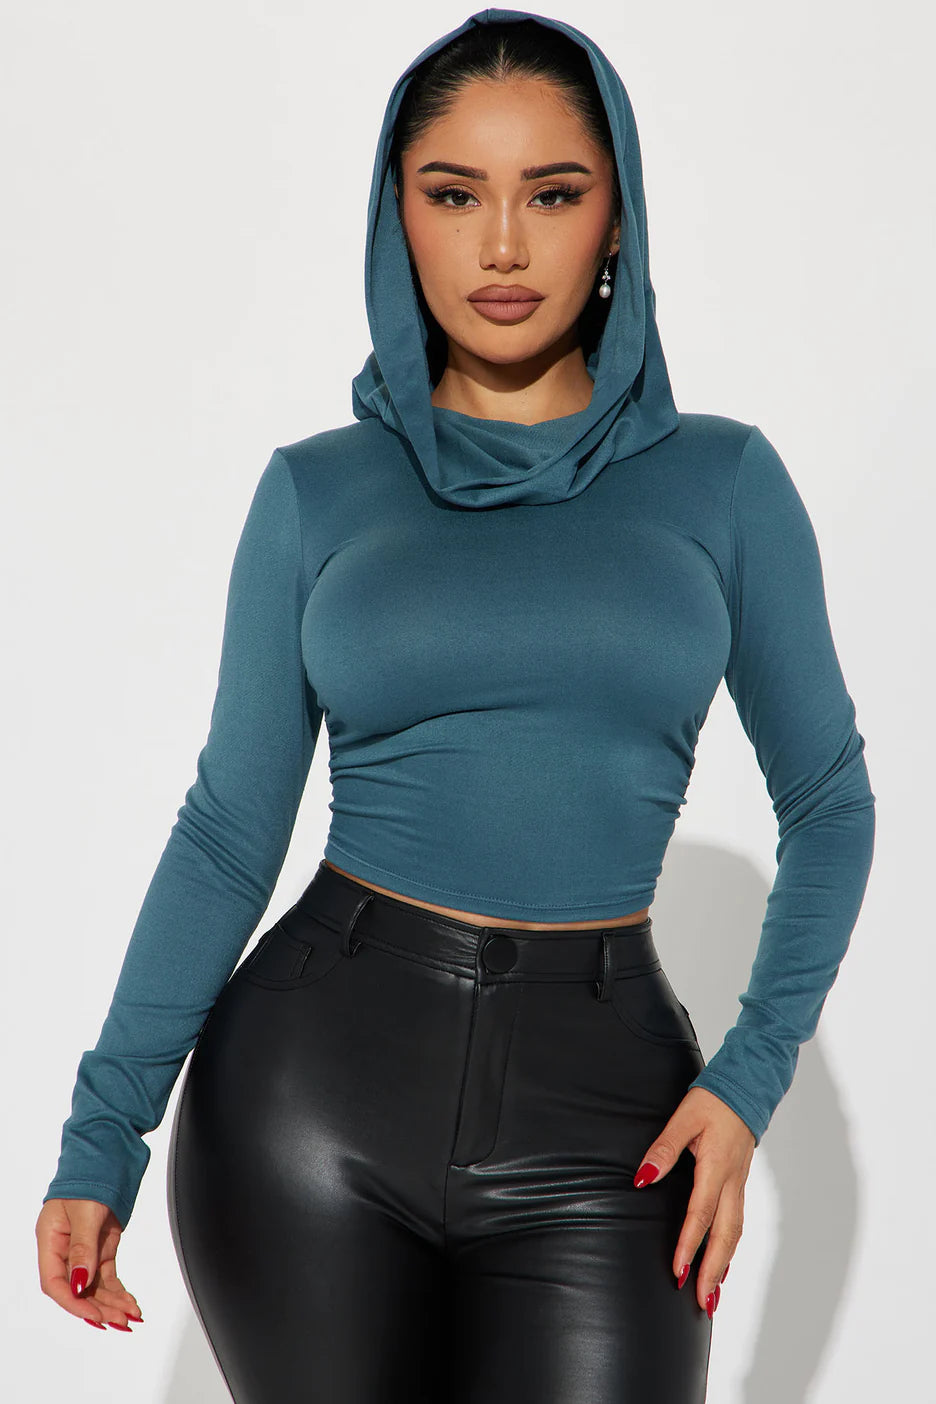 Fashionnova Can't Talk Right Now Hooded Top